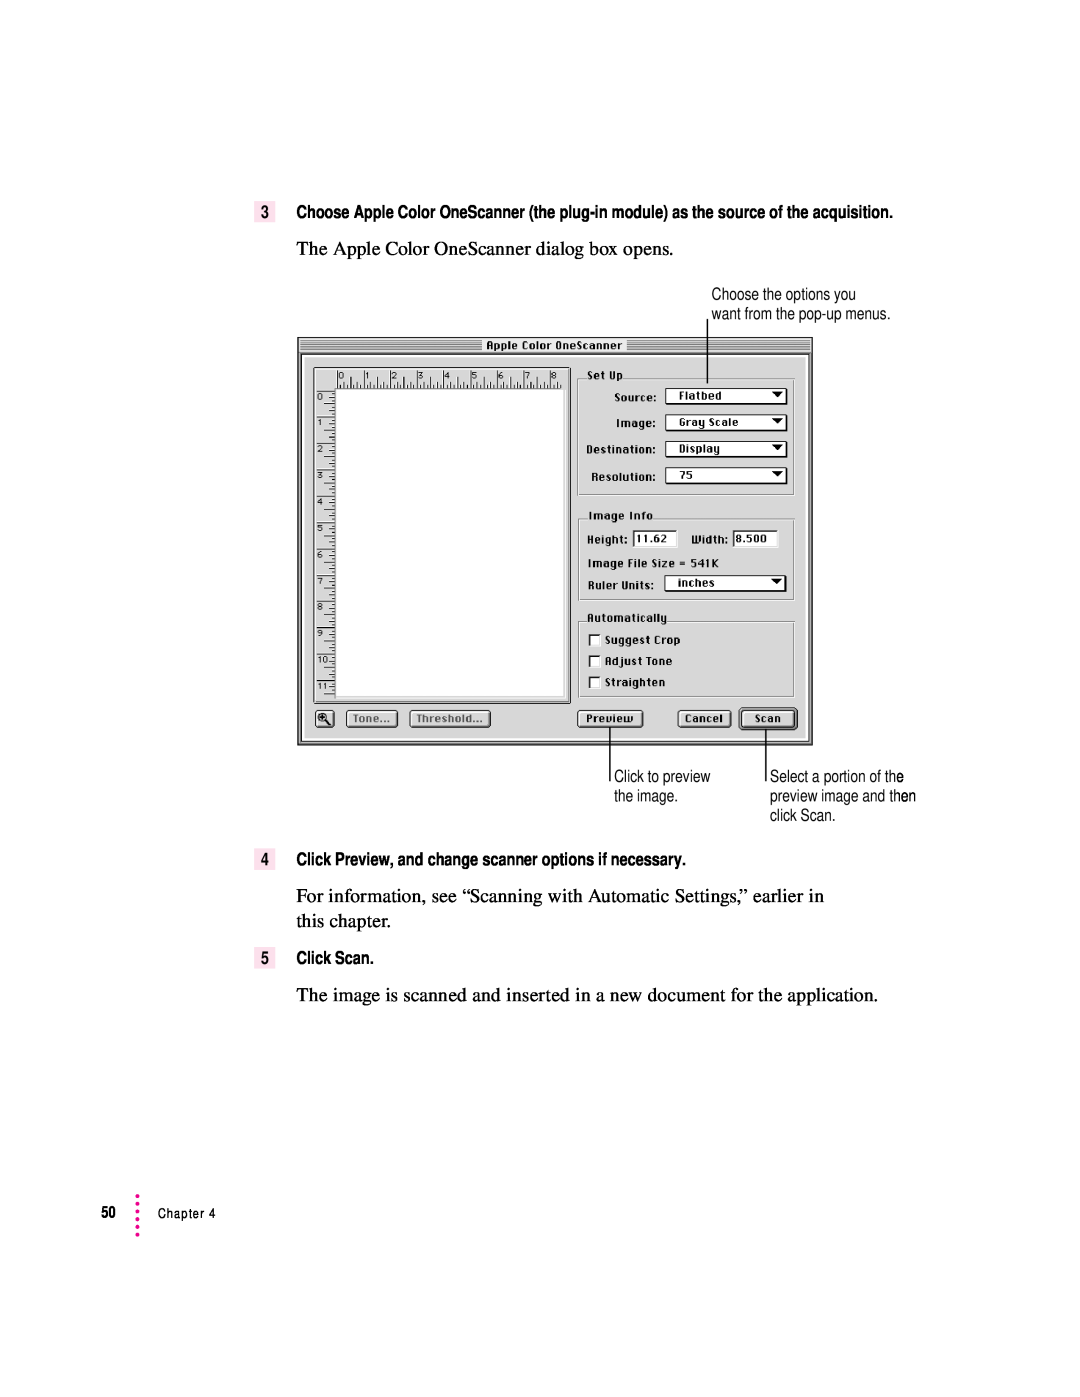 Apple 627, 1230 user manual Click Preview, and change scanner options if necessary, Click Scan 